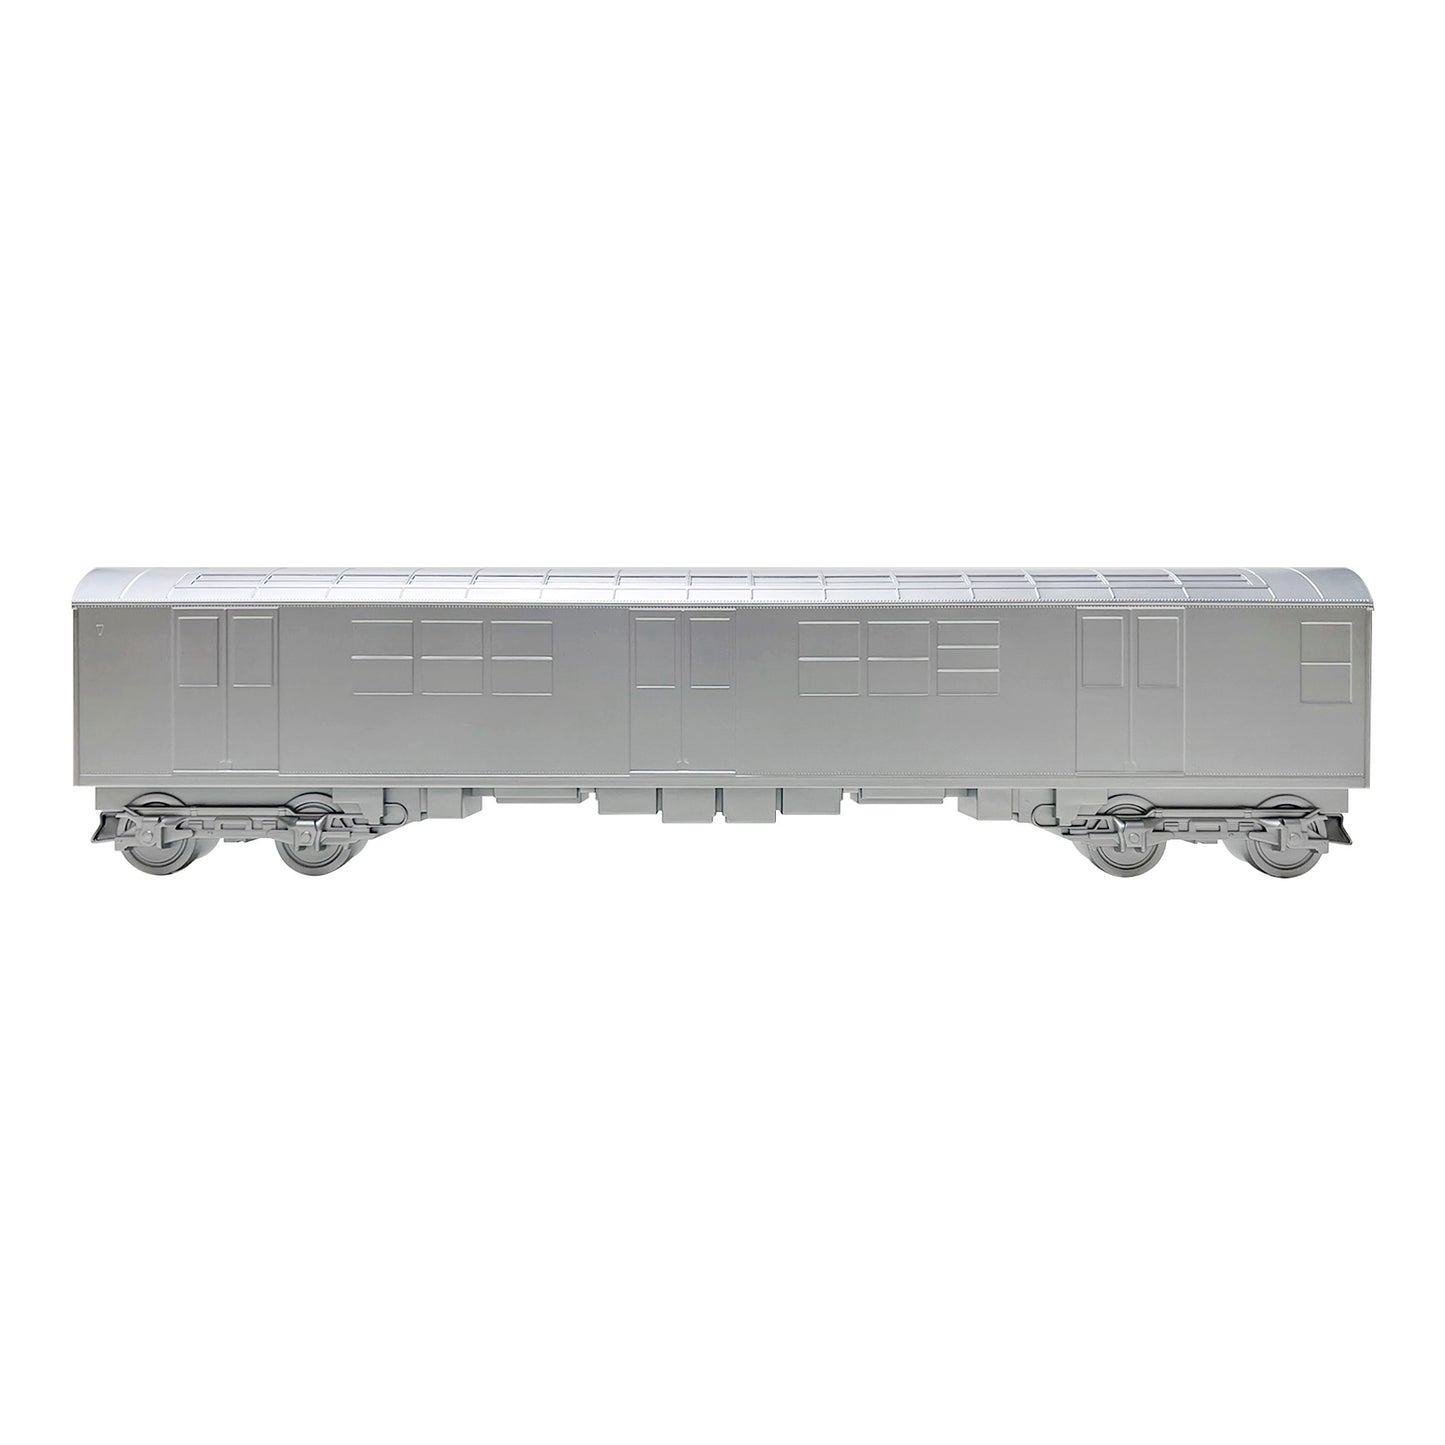 All City Style - Blank NYC Subway Trains Silver